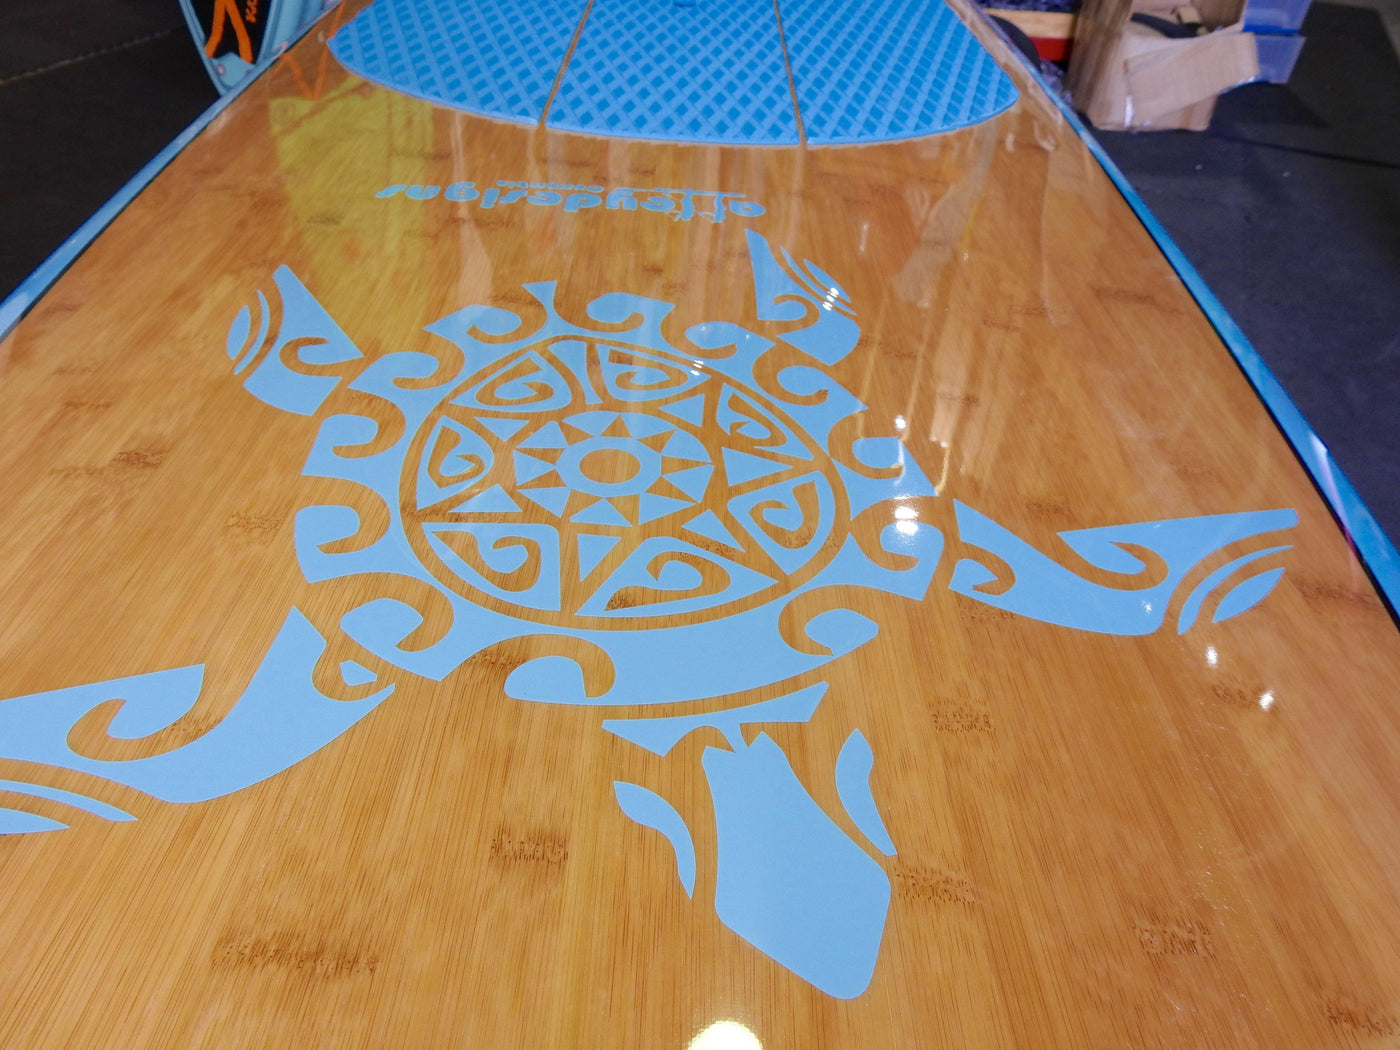 10'6" x 32" Bamboo Classic & Teal Turtle Alleydesigns SUP 11KG - Alleydesigns  Pty Ltd                                             ABN: 44165571264